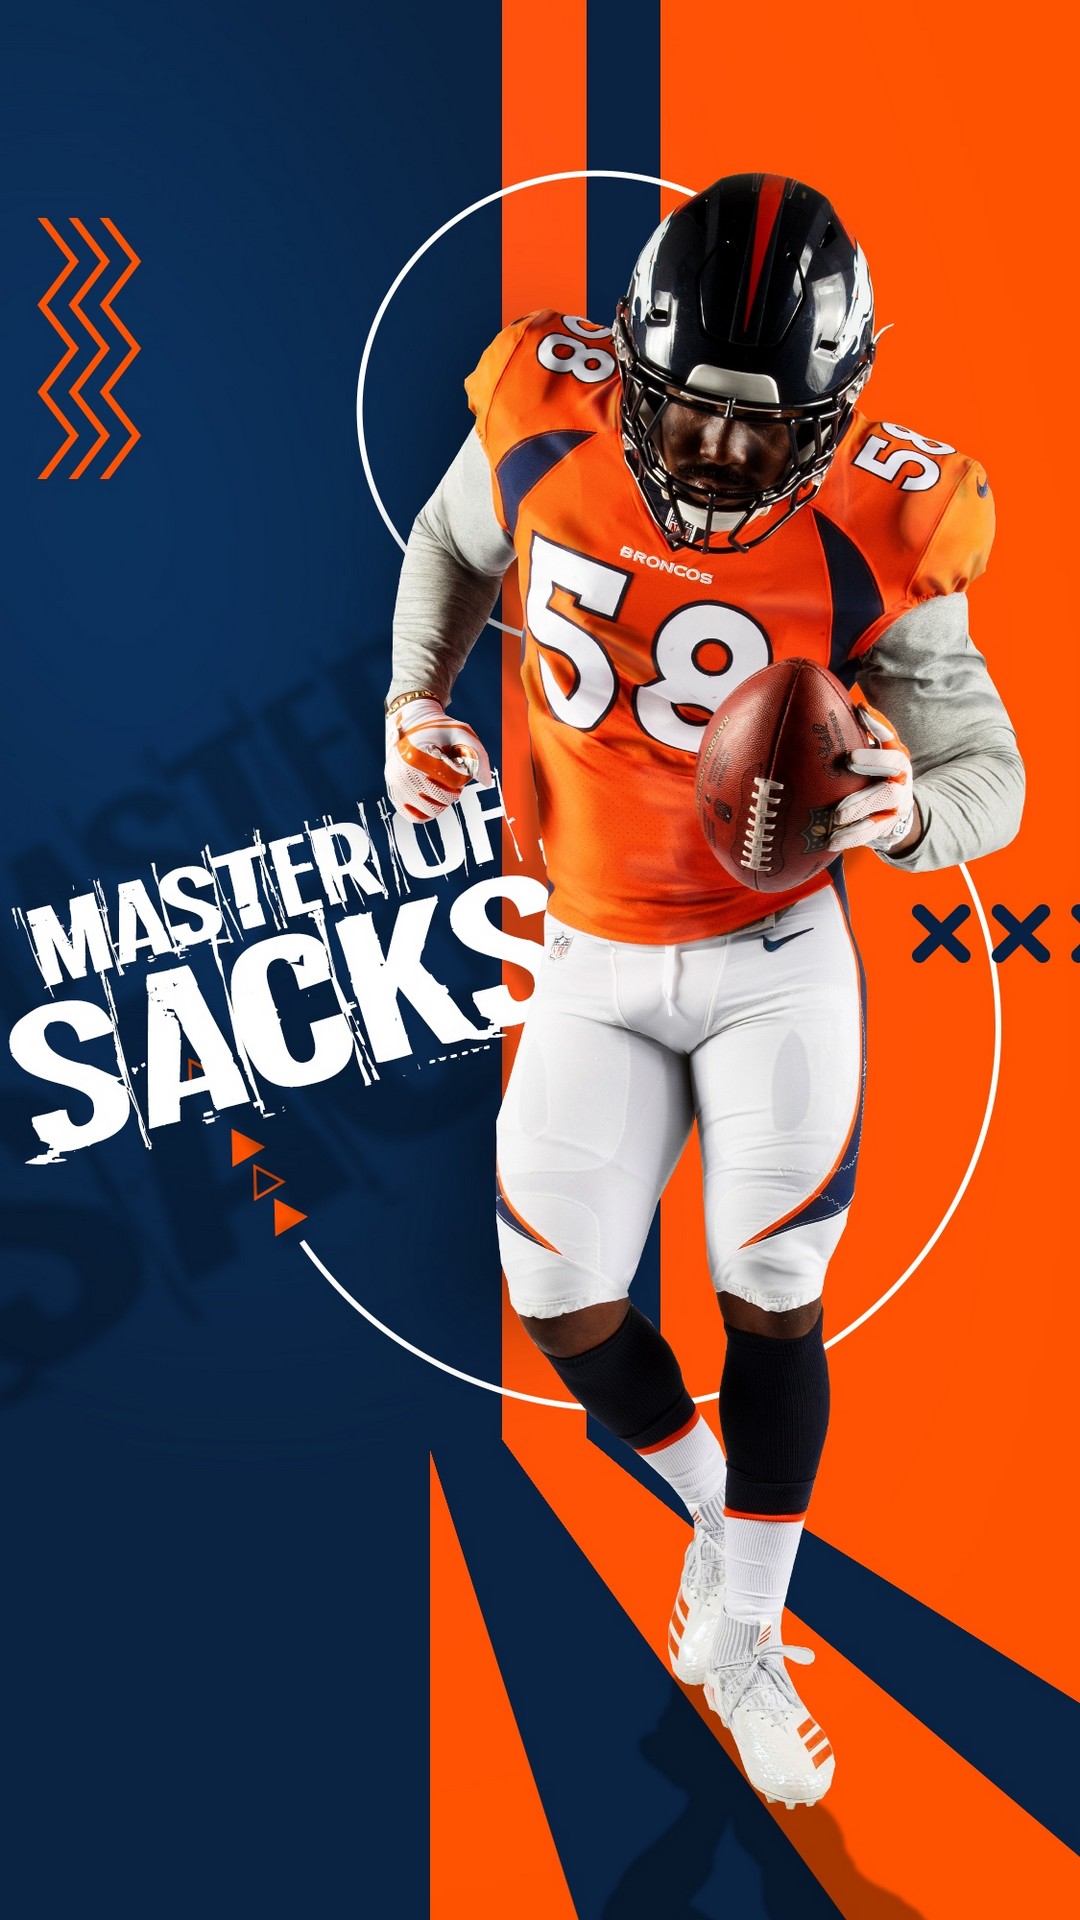 Von Miller Denver Broncos HD Wallpaper For iPhone with high-resolution 1080x1920 pixel. You can use this wallpaper for your Mac or Windows Desktop Background, iPhone, Android or Tablet and another Smartphone device